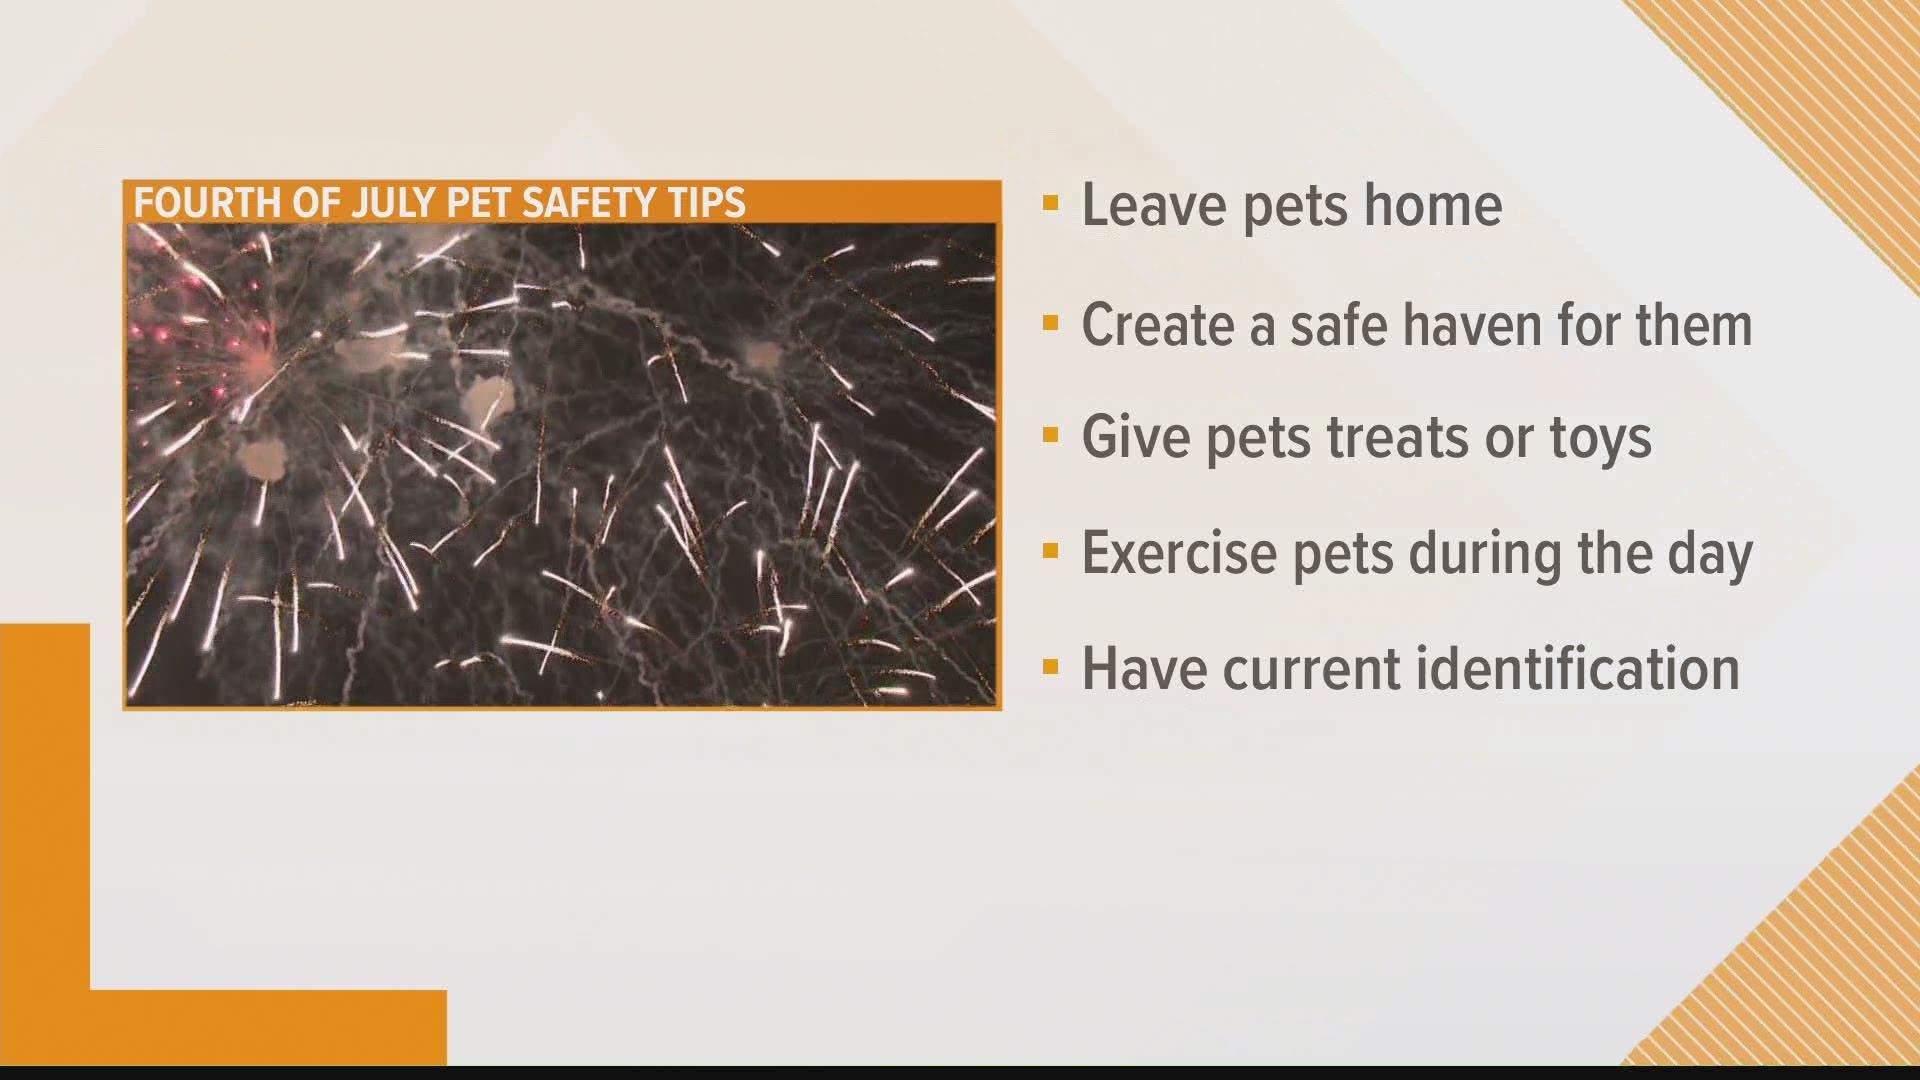 More pets go missing on the Fourth of July than any other day of the year.